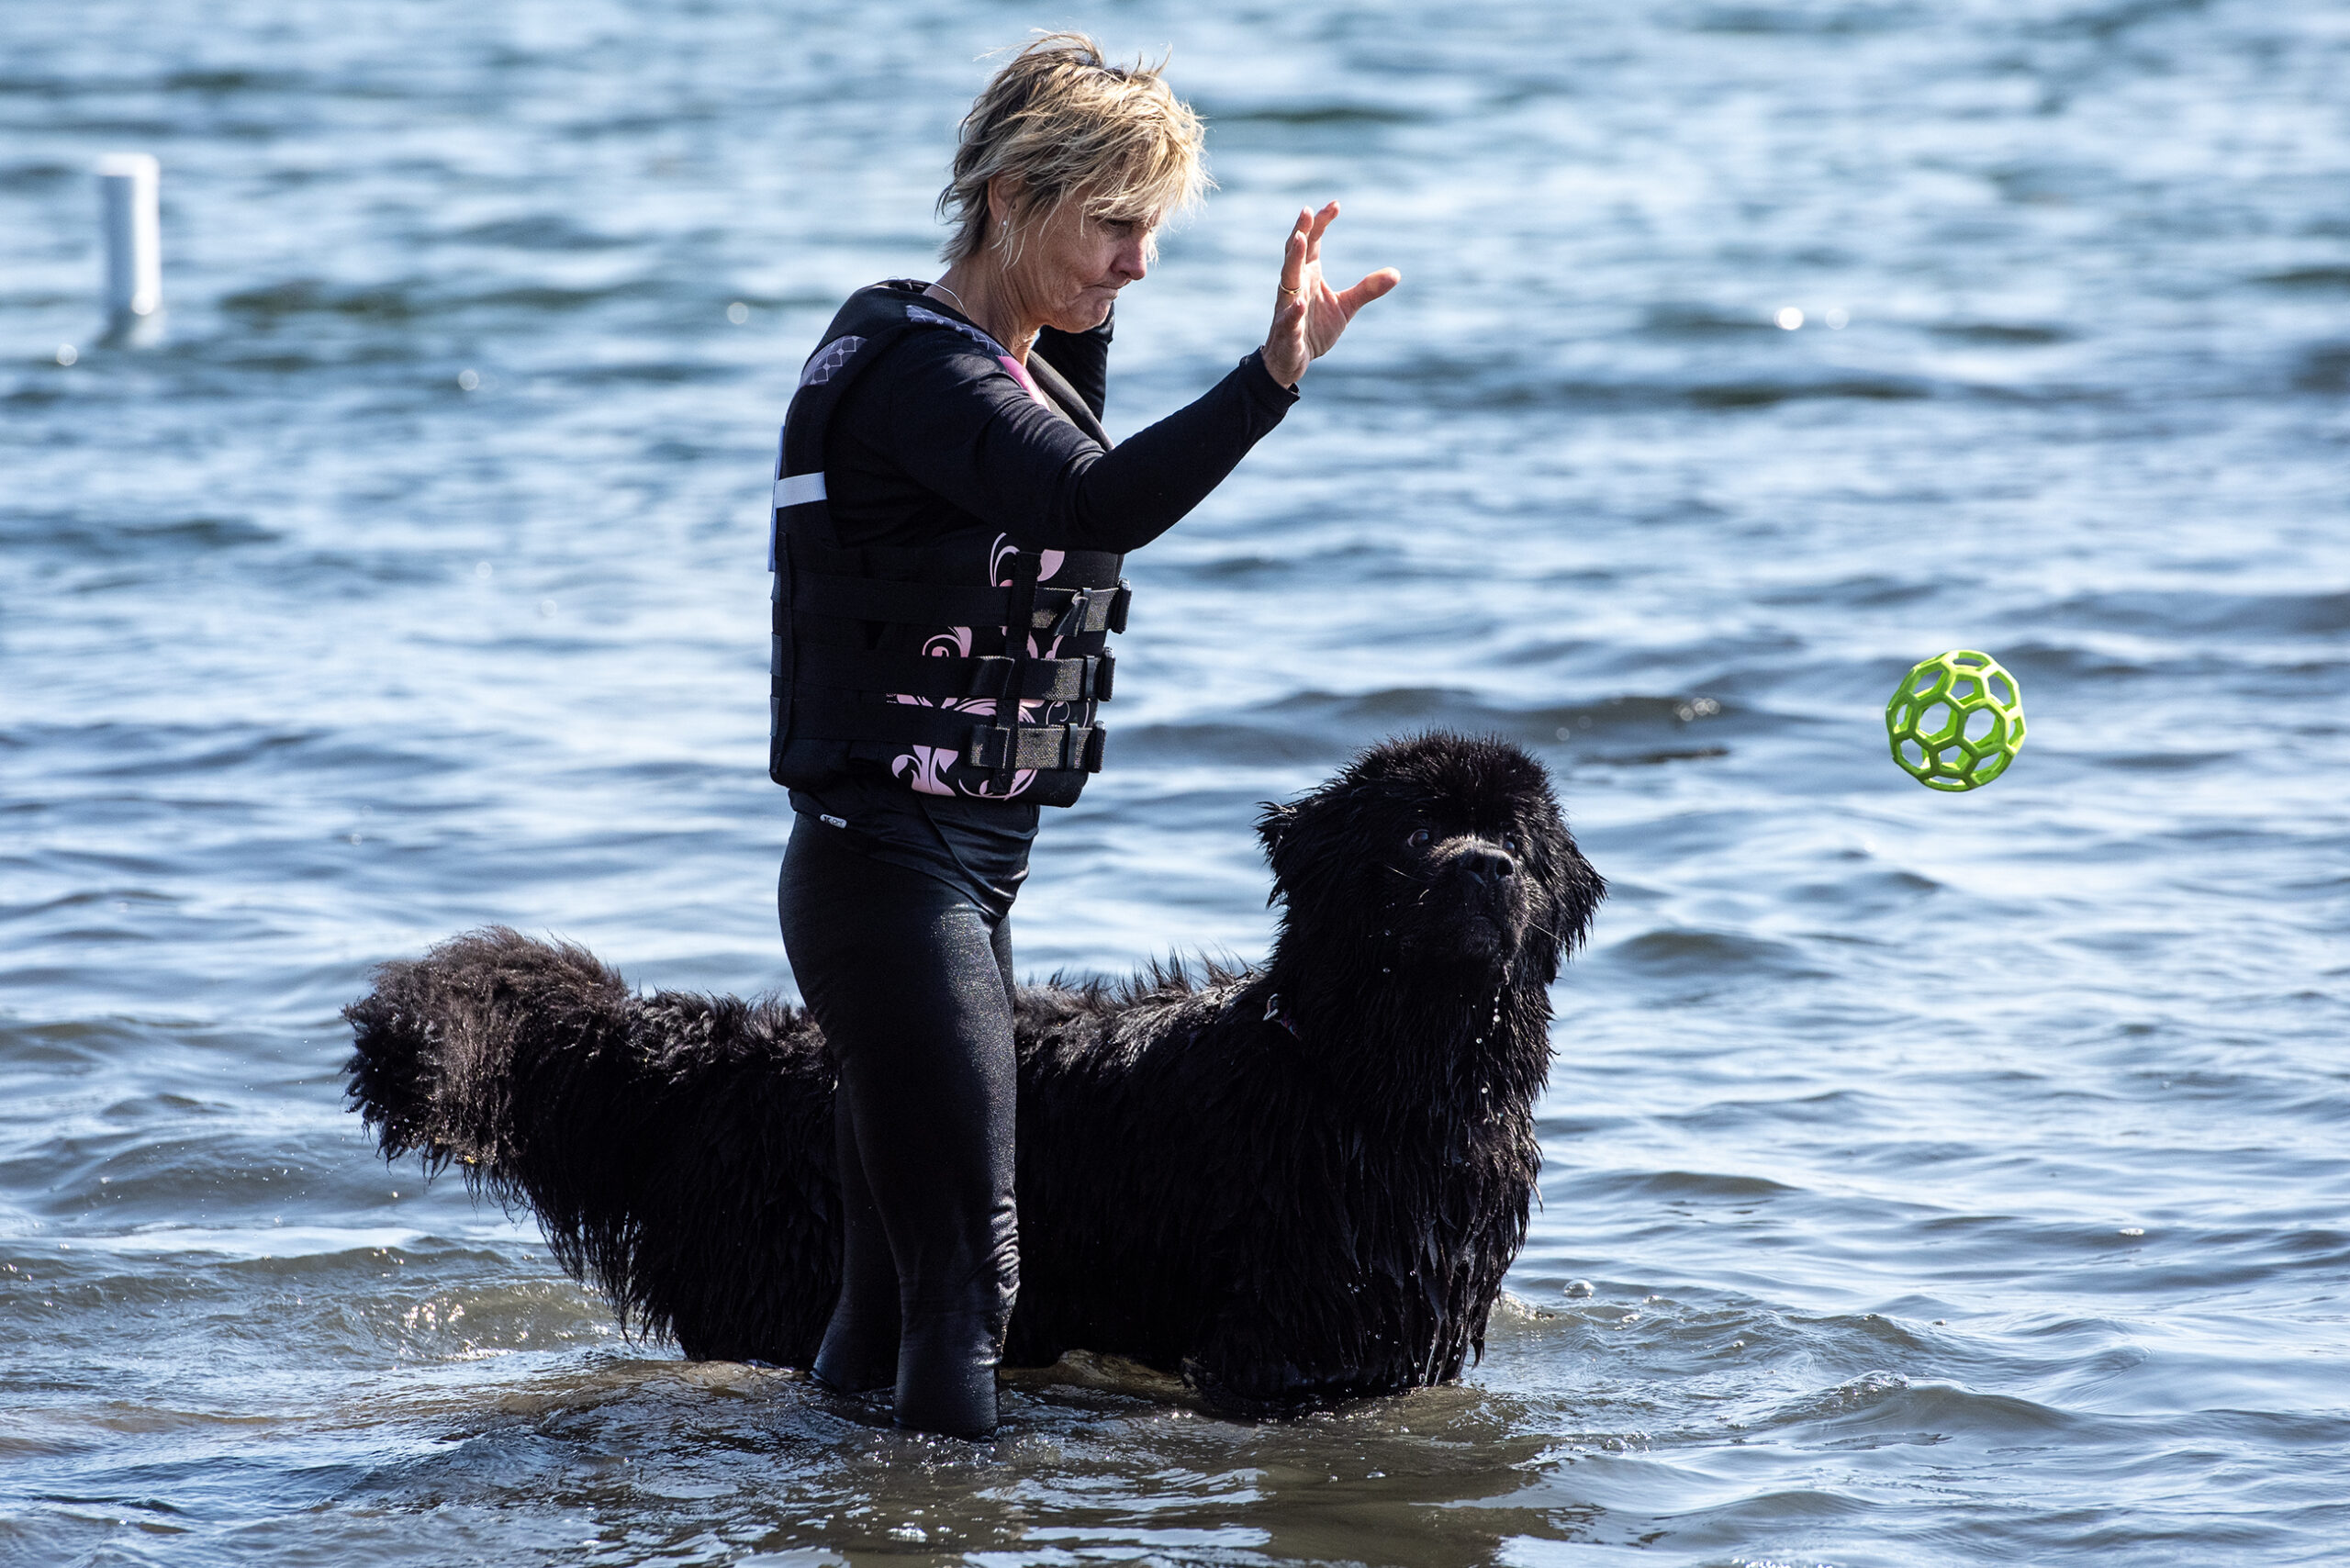 A dog handler throws a green ball into the water as a dog watches.